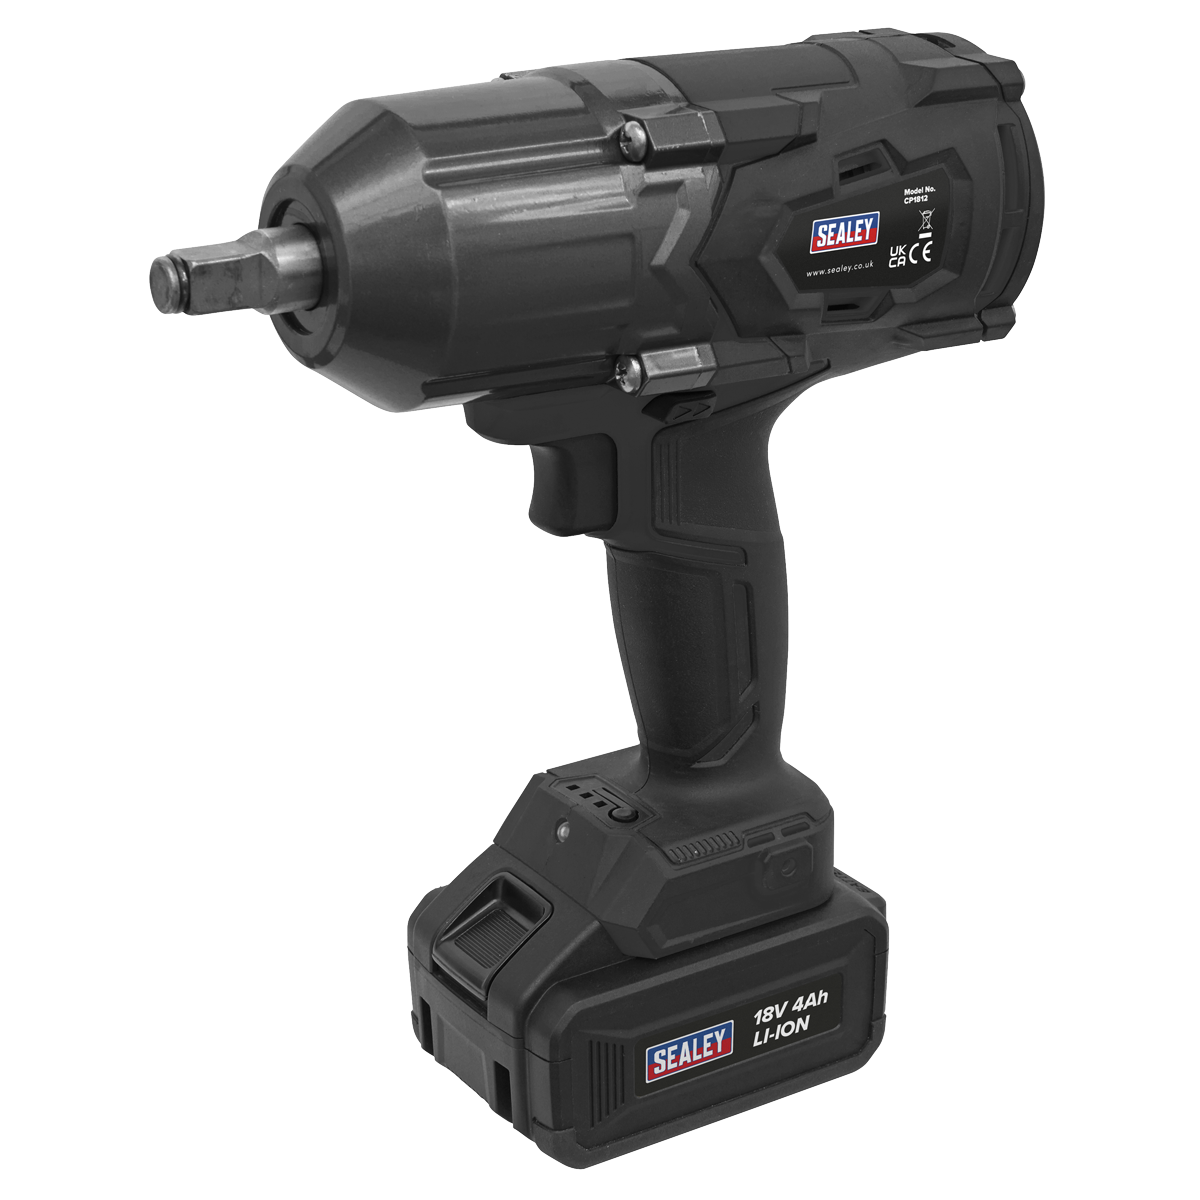 Sealey Cordless Impact Wrench 18V 4Ah Lithium-ion 1/2"Sq Drive CP1812